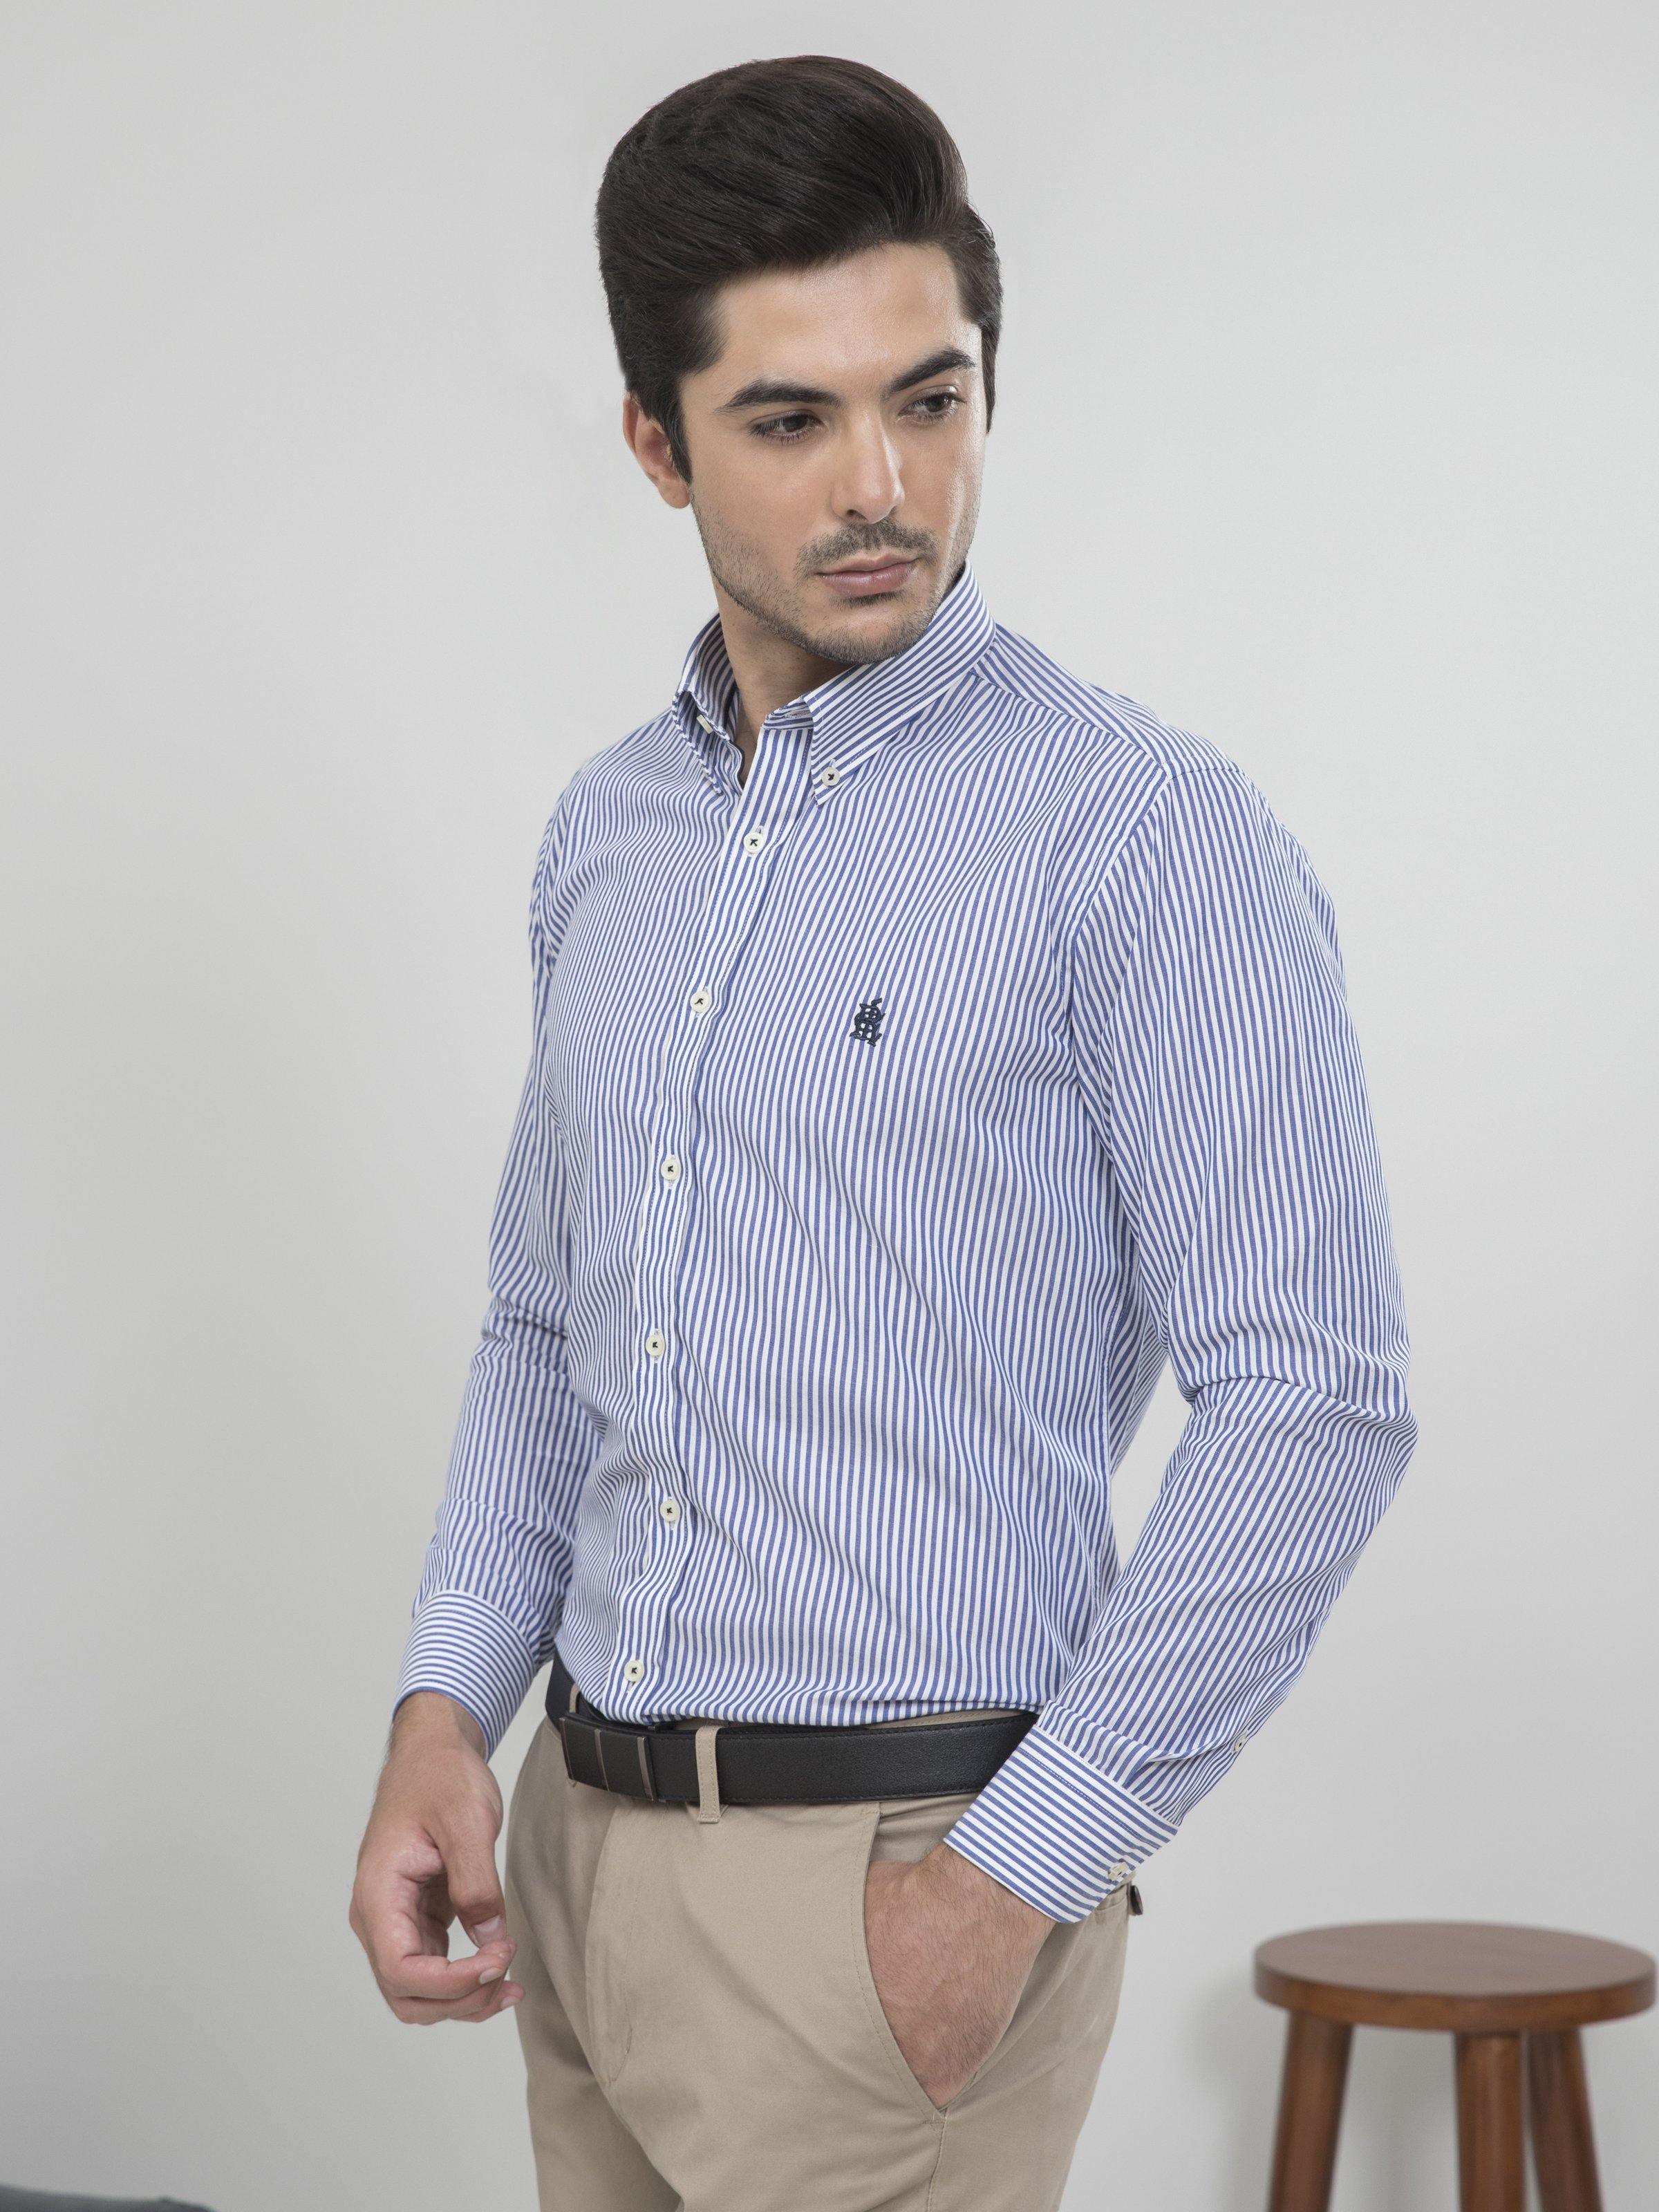 SEMI FORMAL FULL SLEEVES BLUE WHITE LINING at Charcoal Clothing